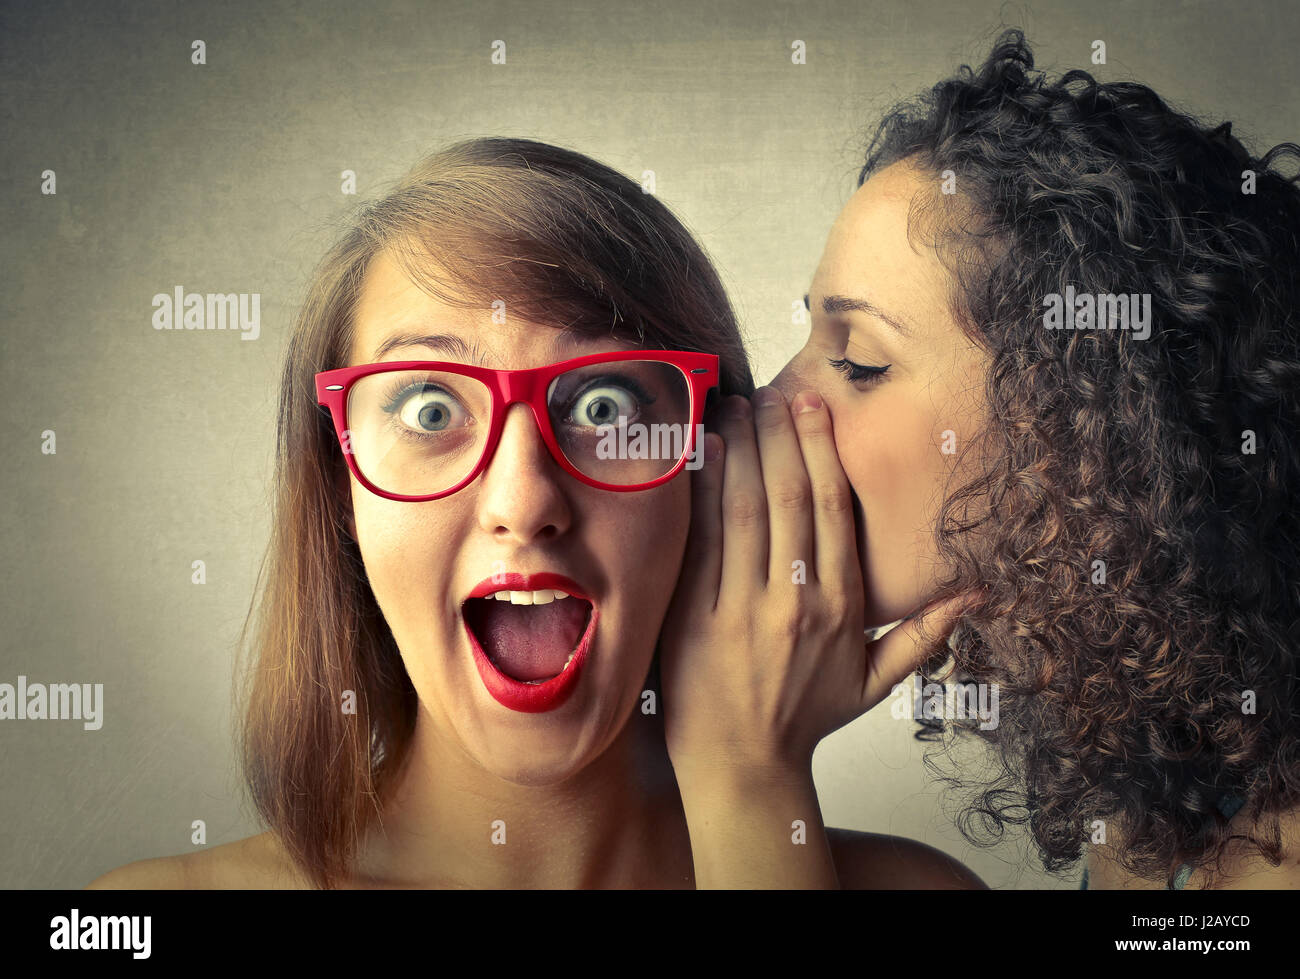 Woman whispering to other woman Stock Photo